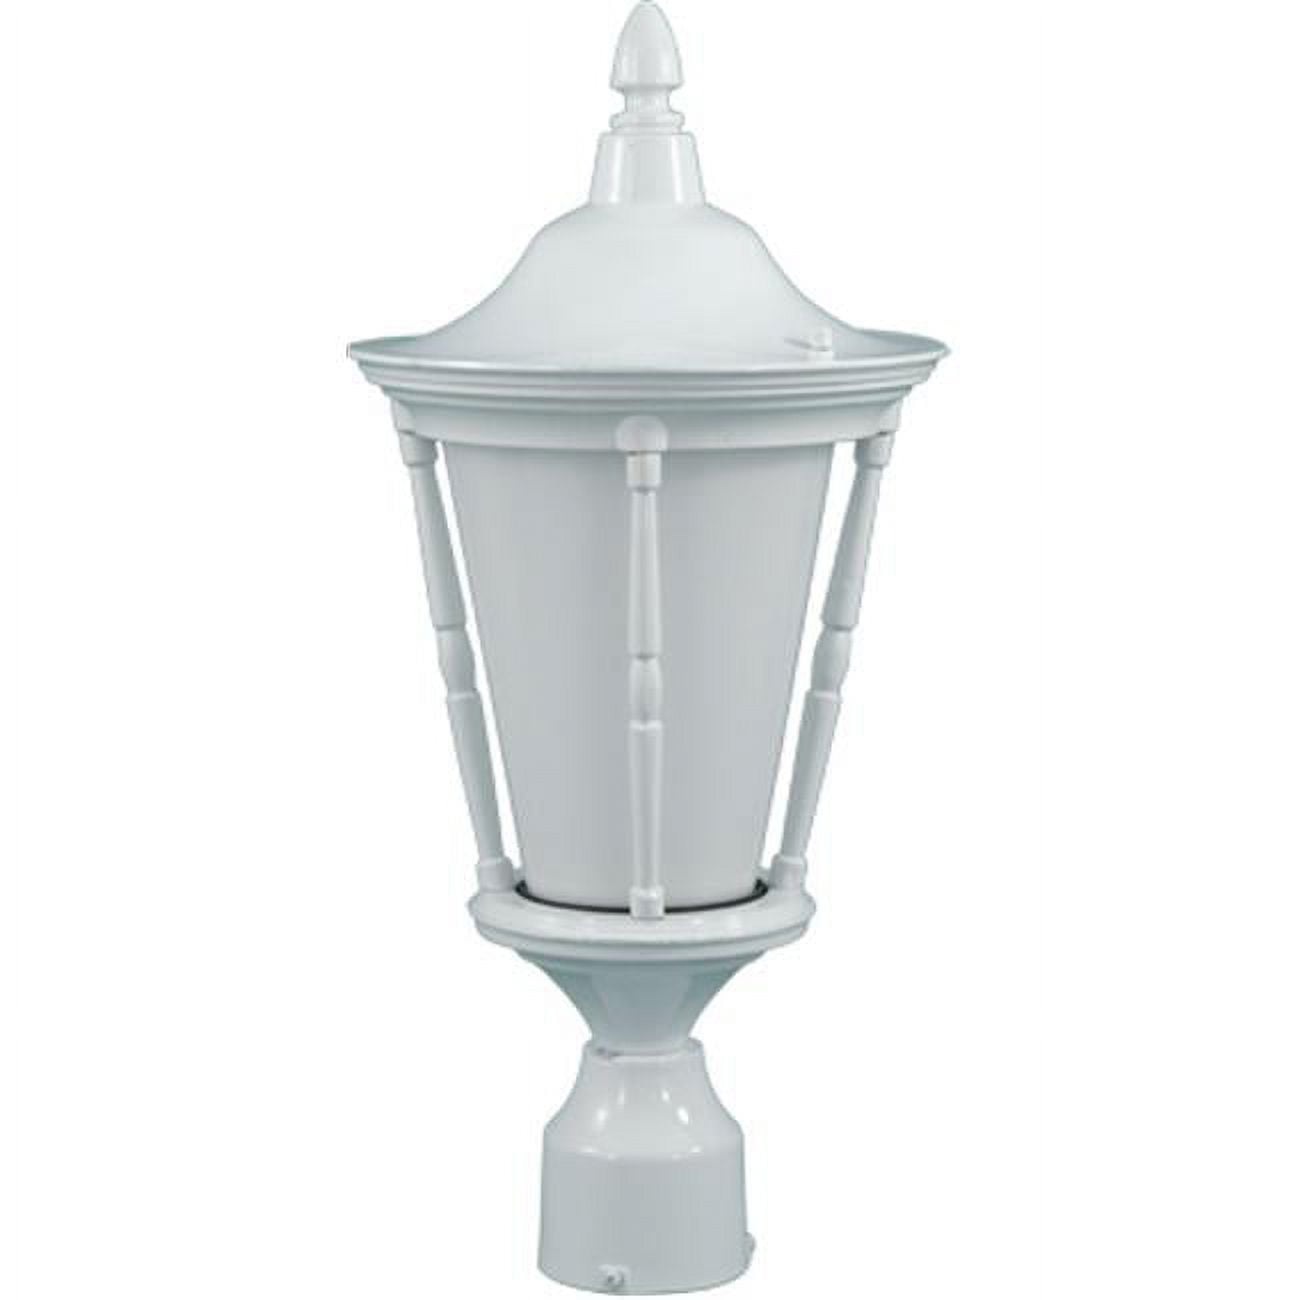 Picture of Dabmar Lighting GM112-W Powder Coated Cast Aluminum Post Top Light Fixture, White - 19.75 x 9.25 x 9.25 in.